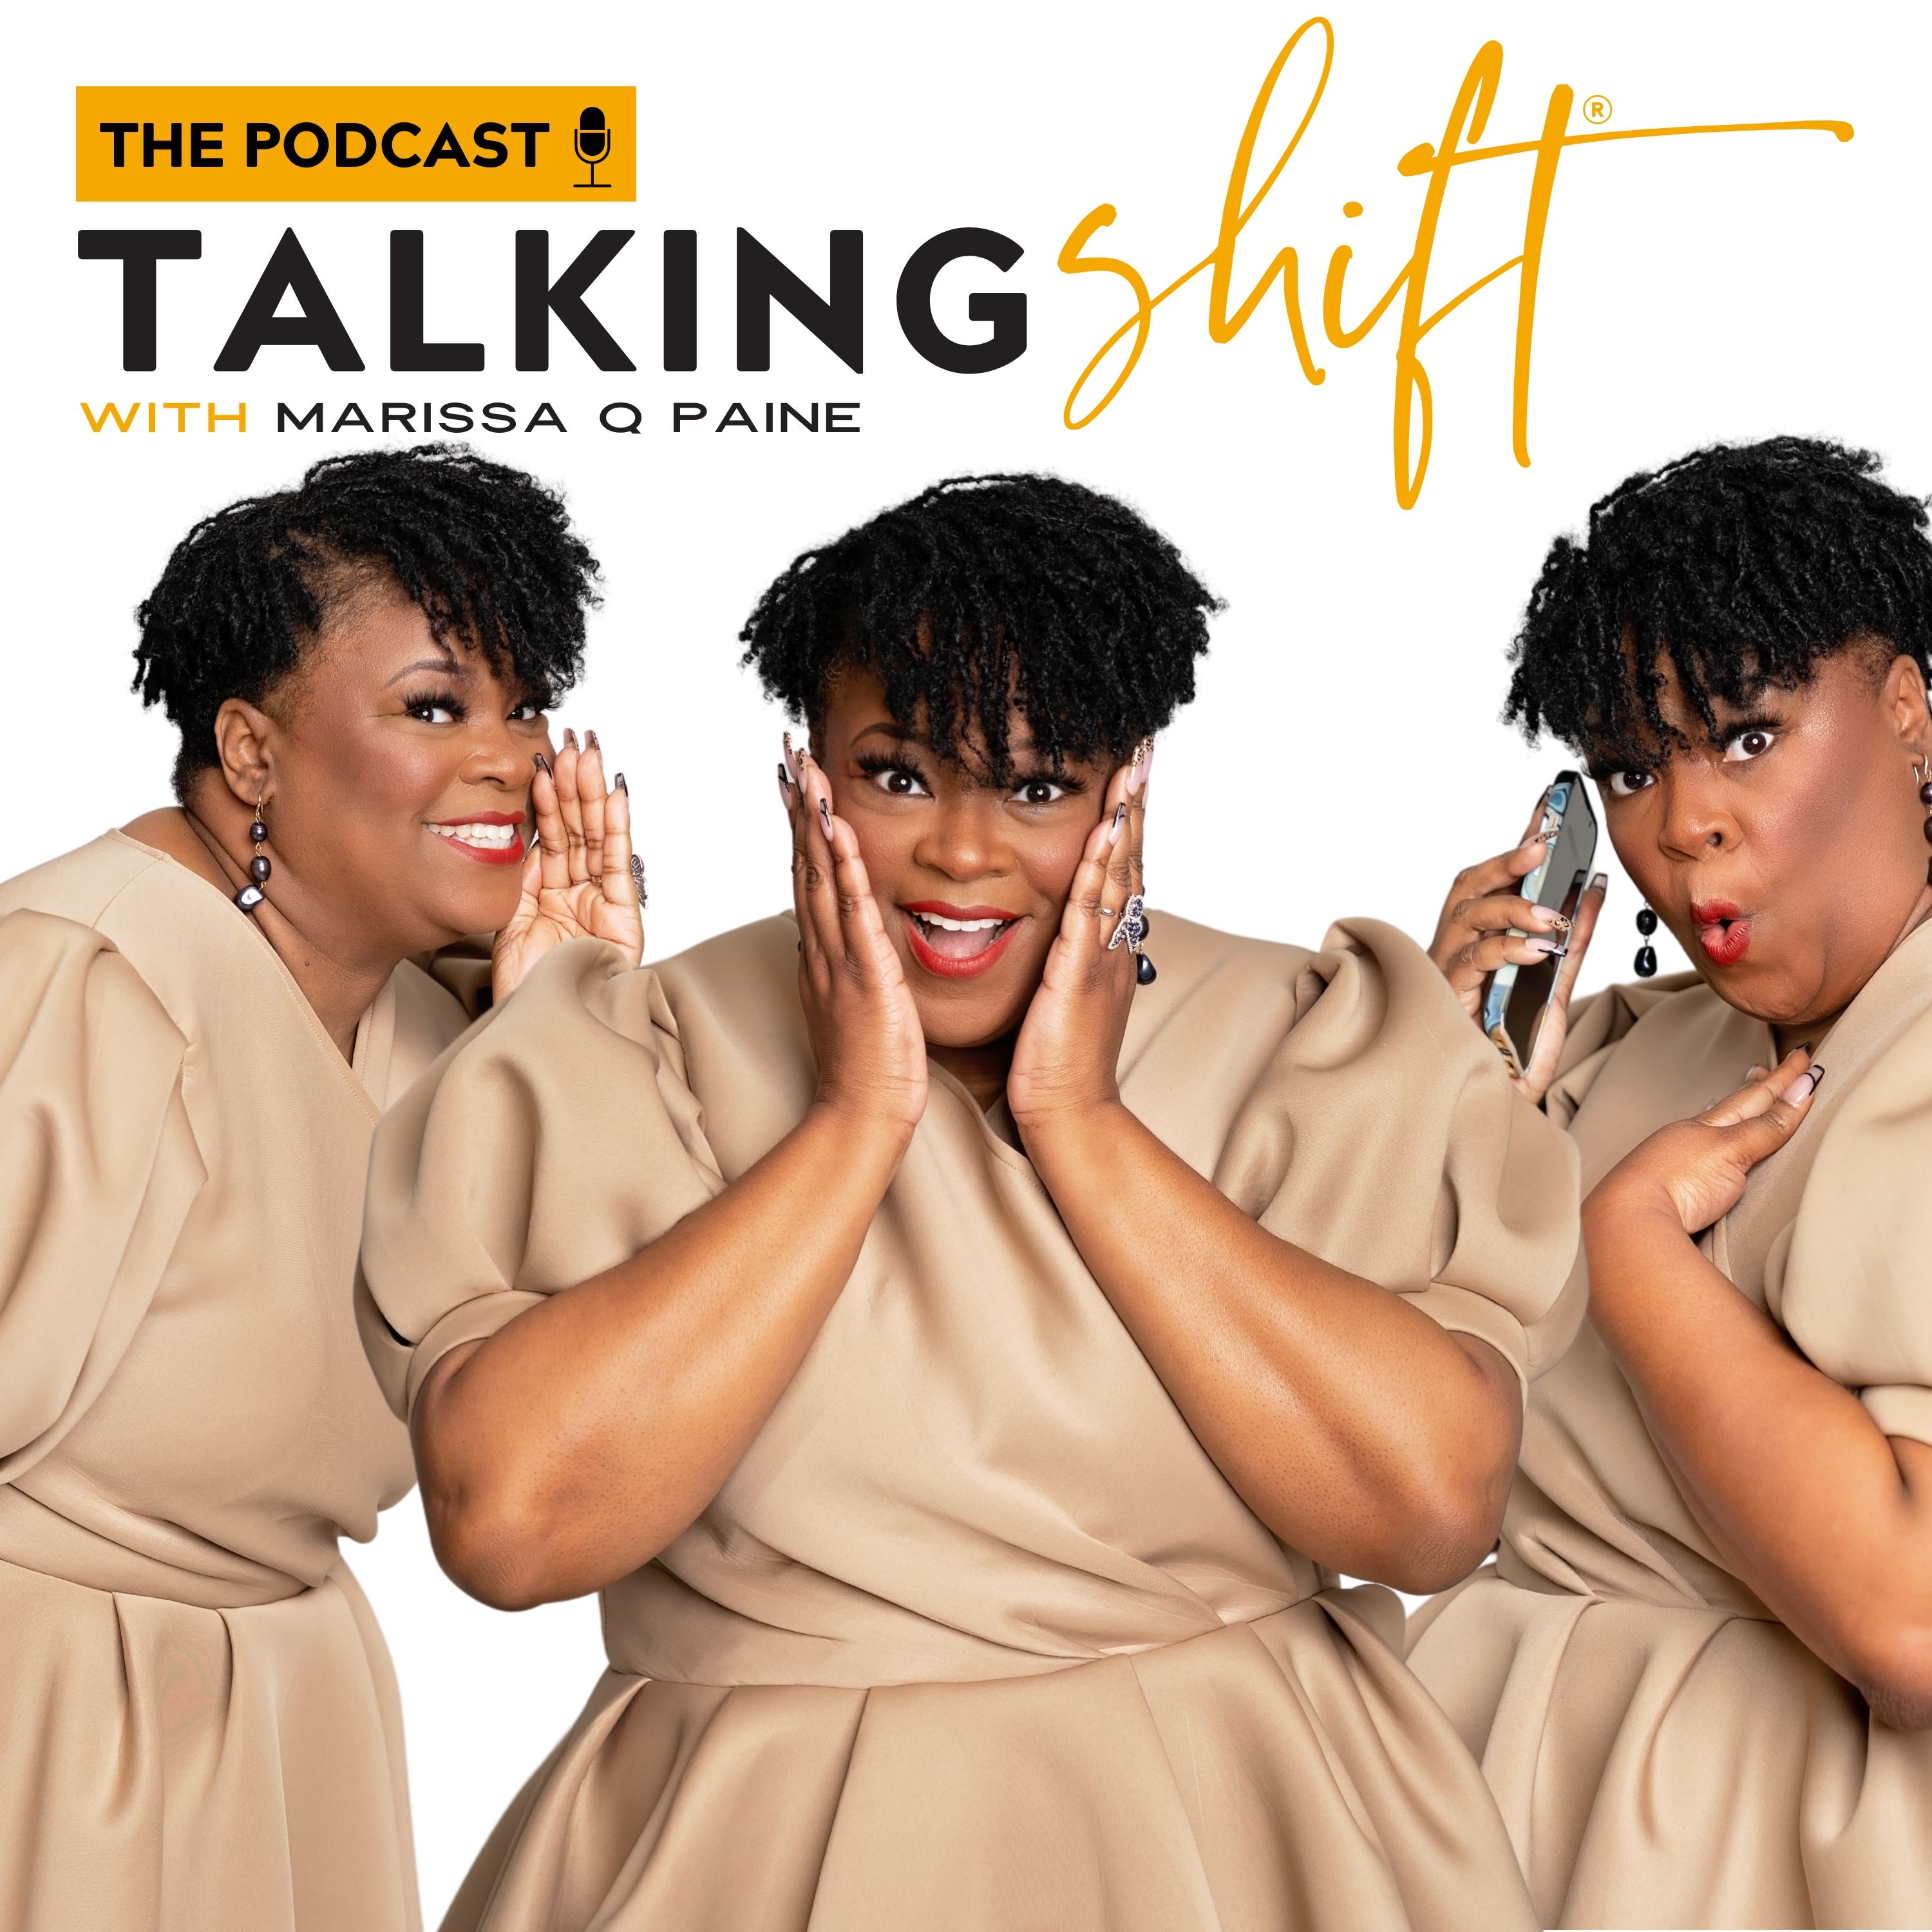 Talking Shift The Podcast with Marissa Q. Paine